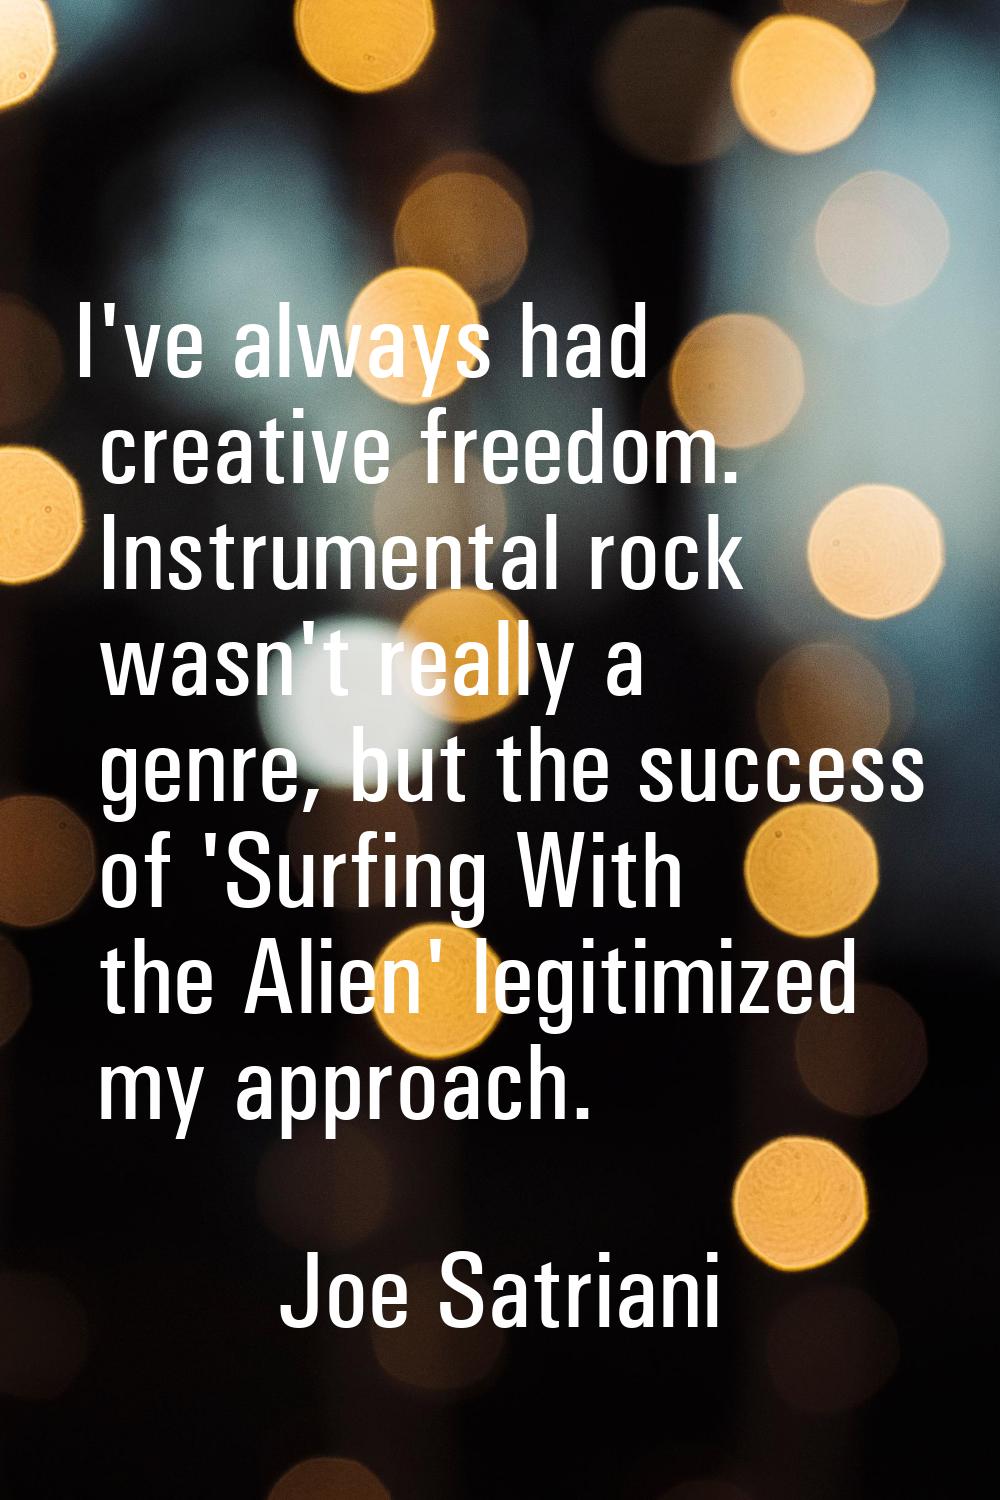 I've always had creative freedom. Instrumental rock wasn't really a genre, but the success of 'Surf